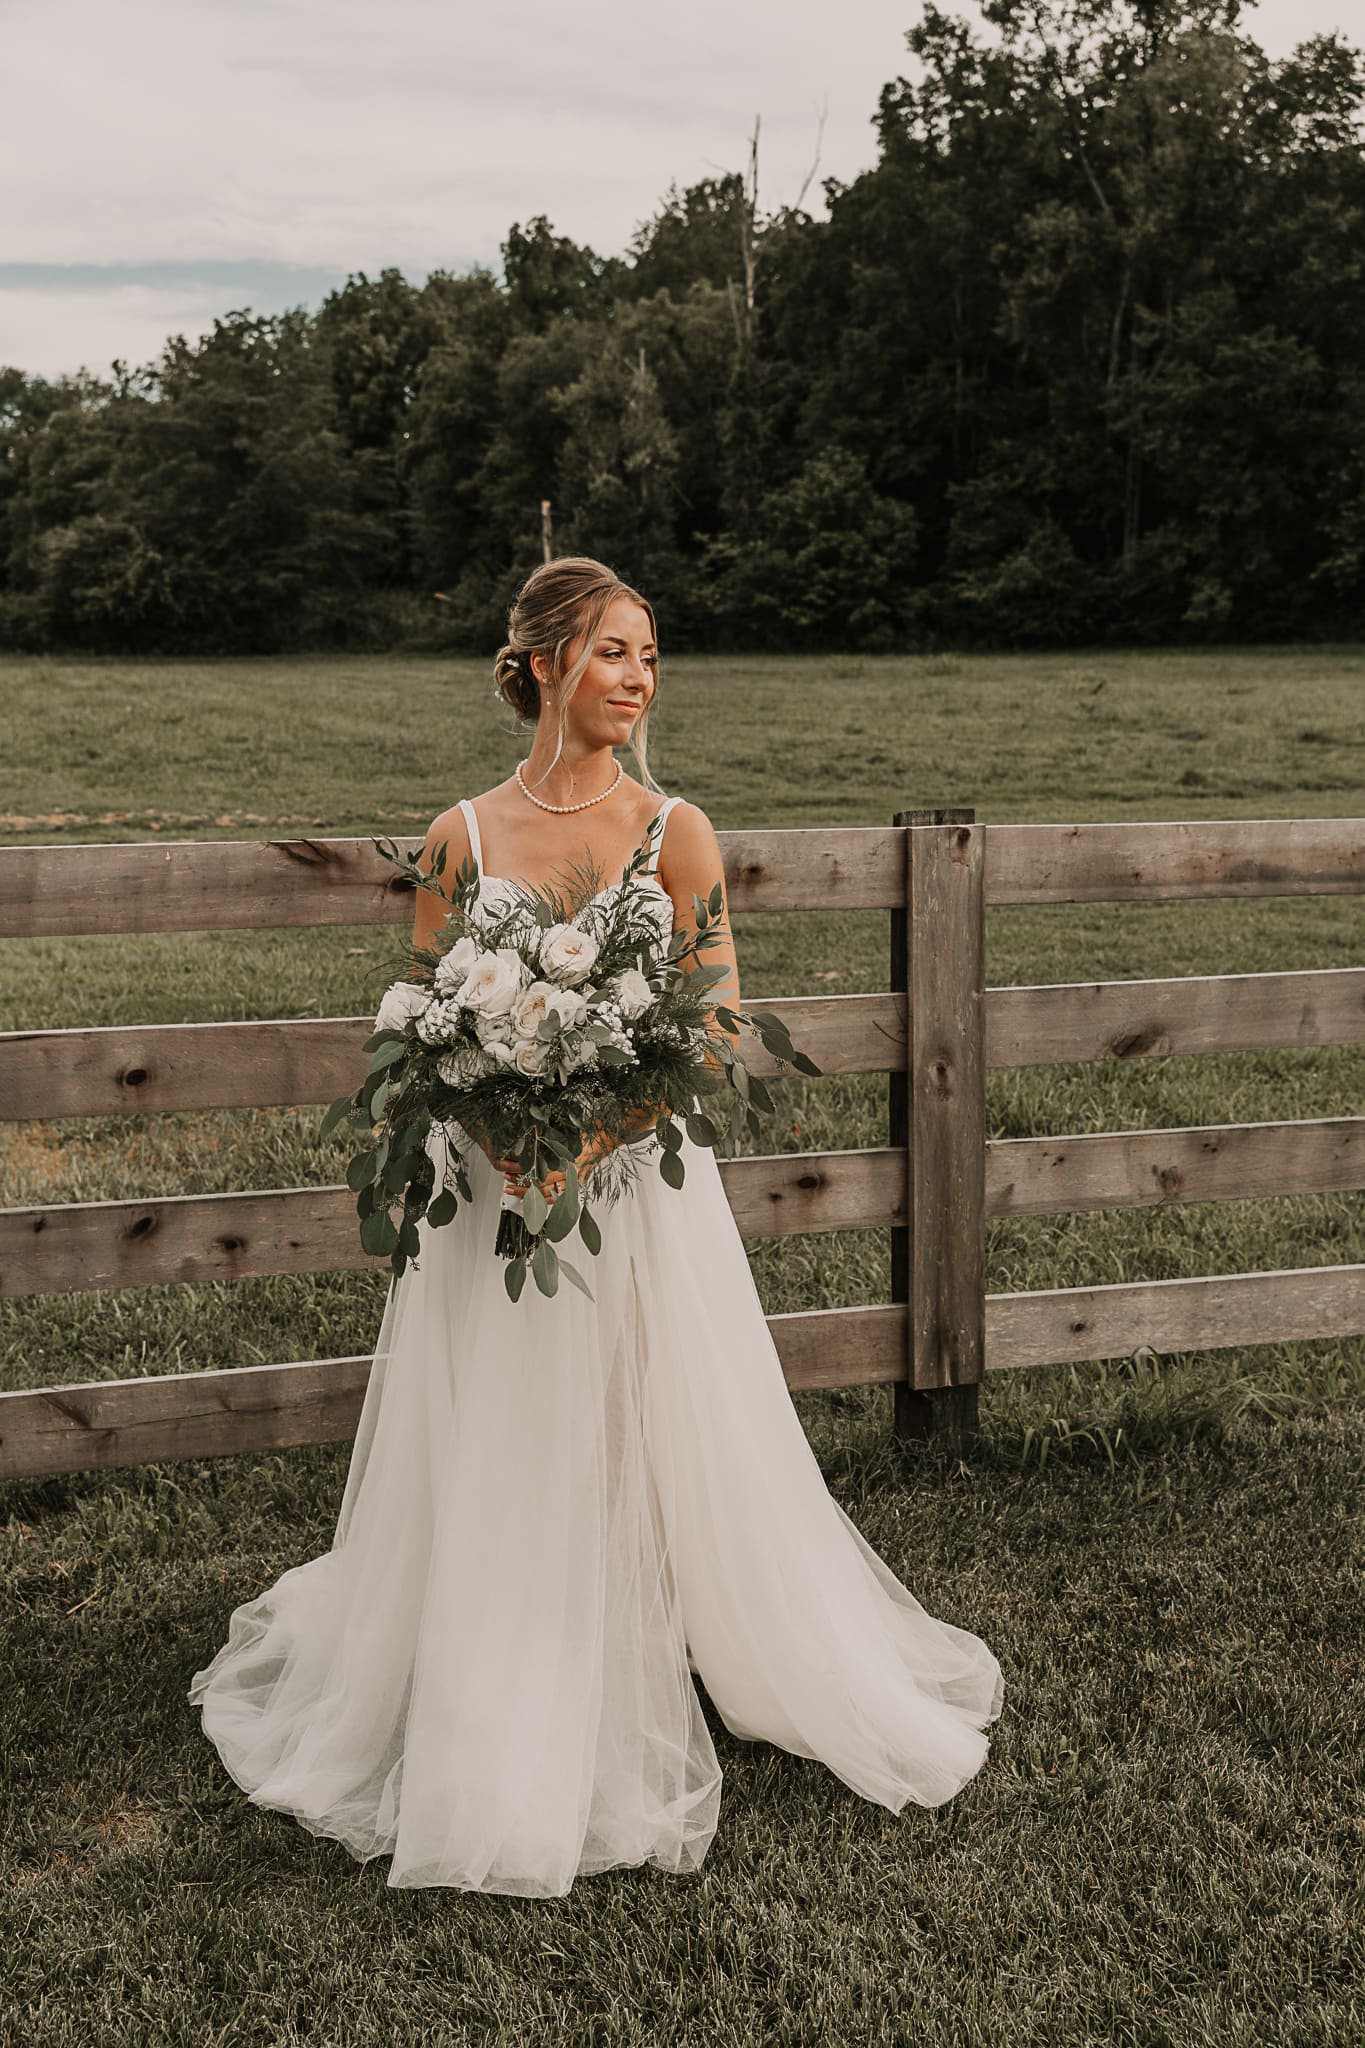 Bride holds bouquet and poses in front of a fence, while looking over her shoulder.